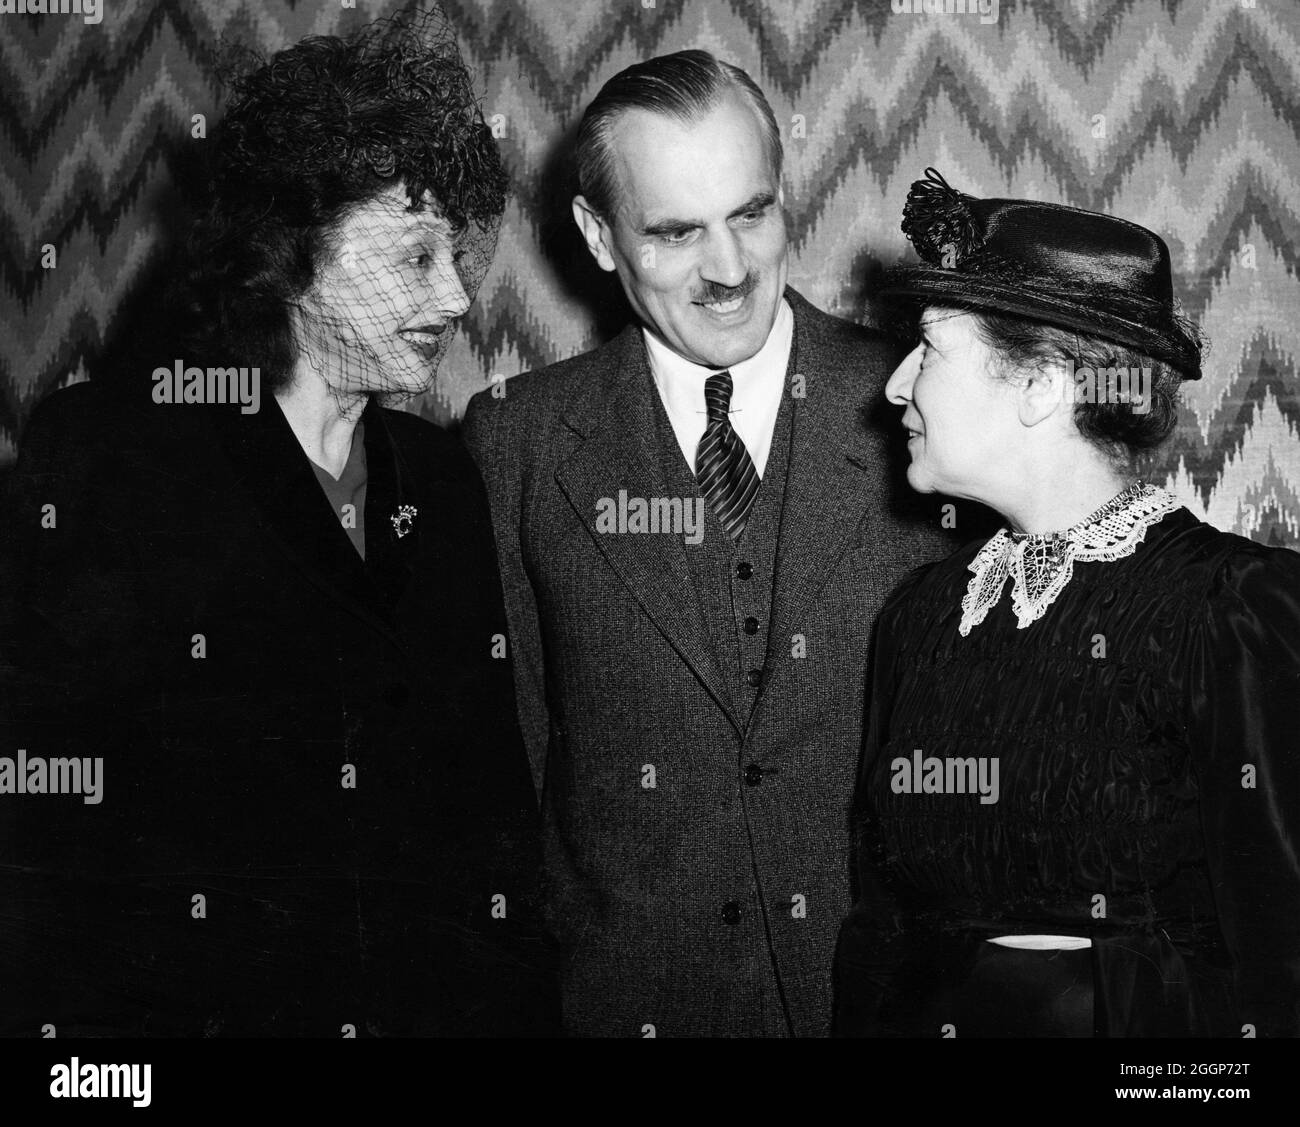 Austrian-born physicist Lise Meitner (1878-1968), at right, with actress Katherine Cornell and physicist Arthur H. Compton on June 6, 1946, when Meitner and Cornell received awards from the National Conference of Christians and Jews. Meitner discovered nuclear fission along with Otto Hahn but was overlooked when they gave Hahn the Nobel Prize in Chemistry in 1944. Her contribution was formally acknowledged when she received the Fermi Prize in 1966. Stock Photo